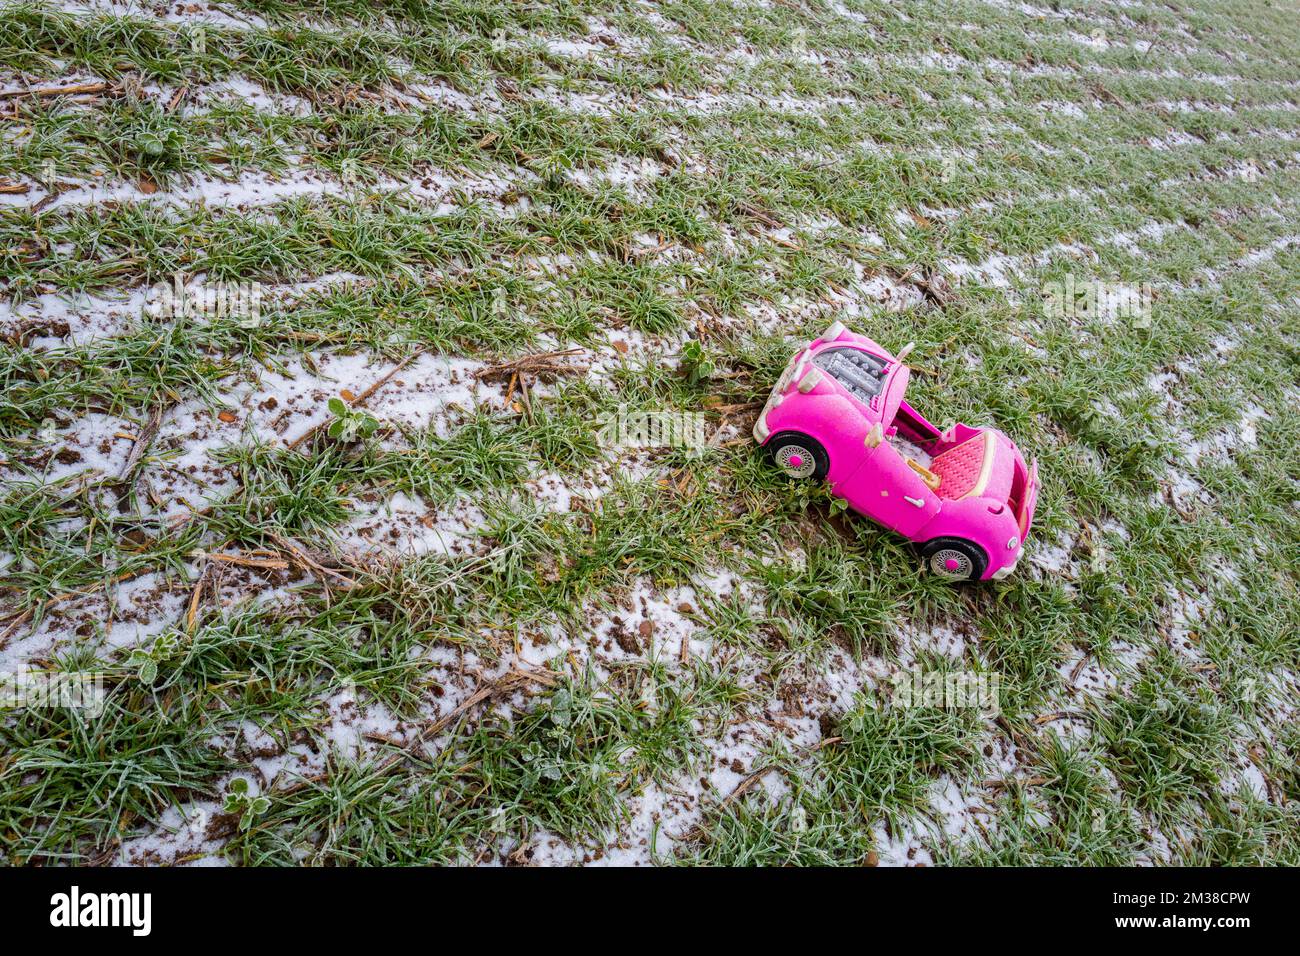 Pink retro convertible plastic toy car for 18-inch dolls by Og Girl dumped in a field on a cold, frosty day. Stock Photo